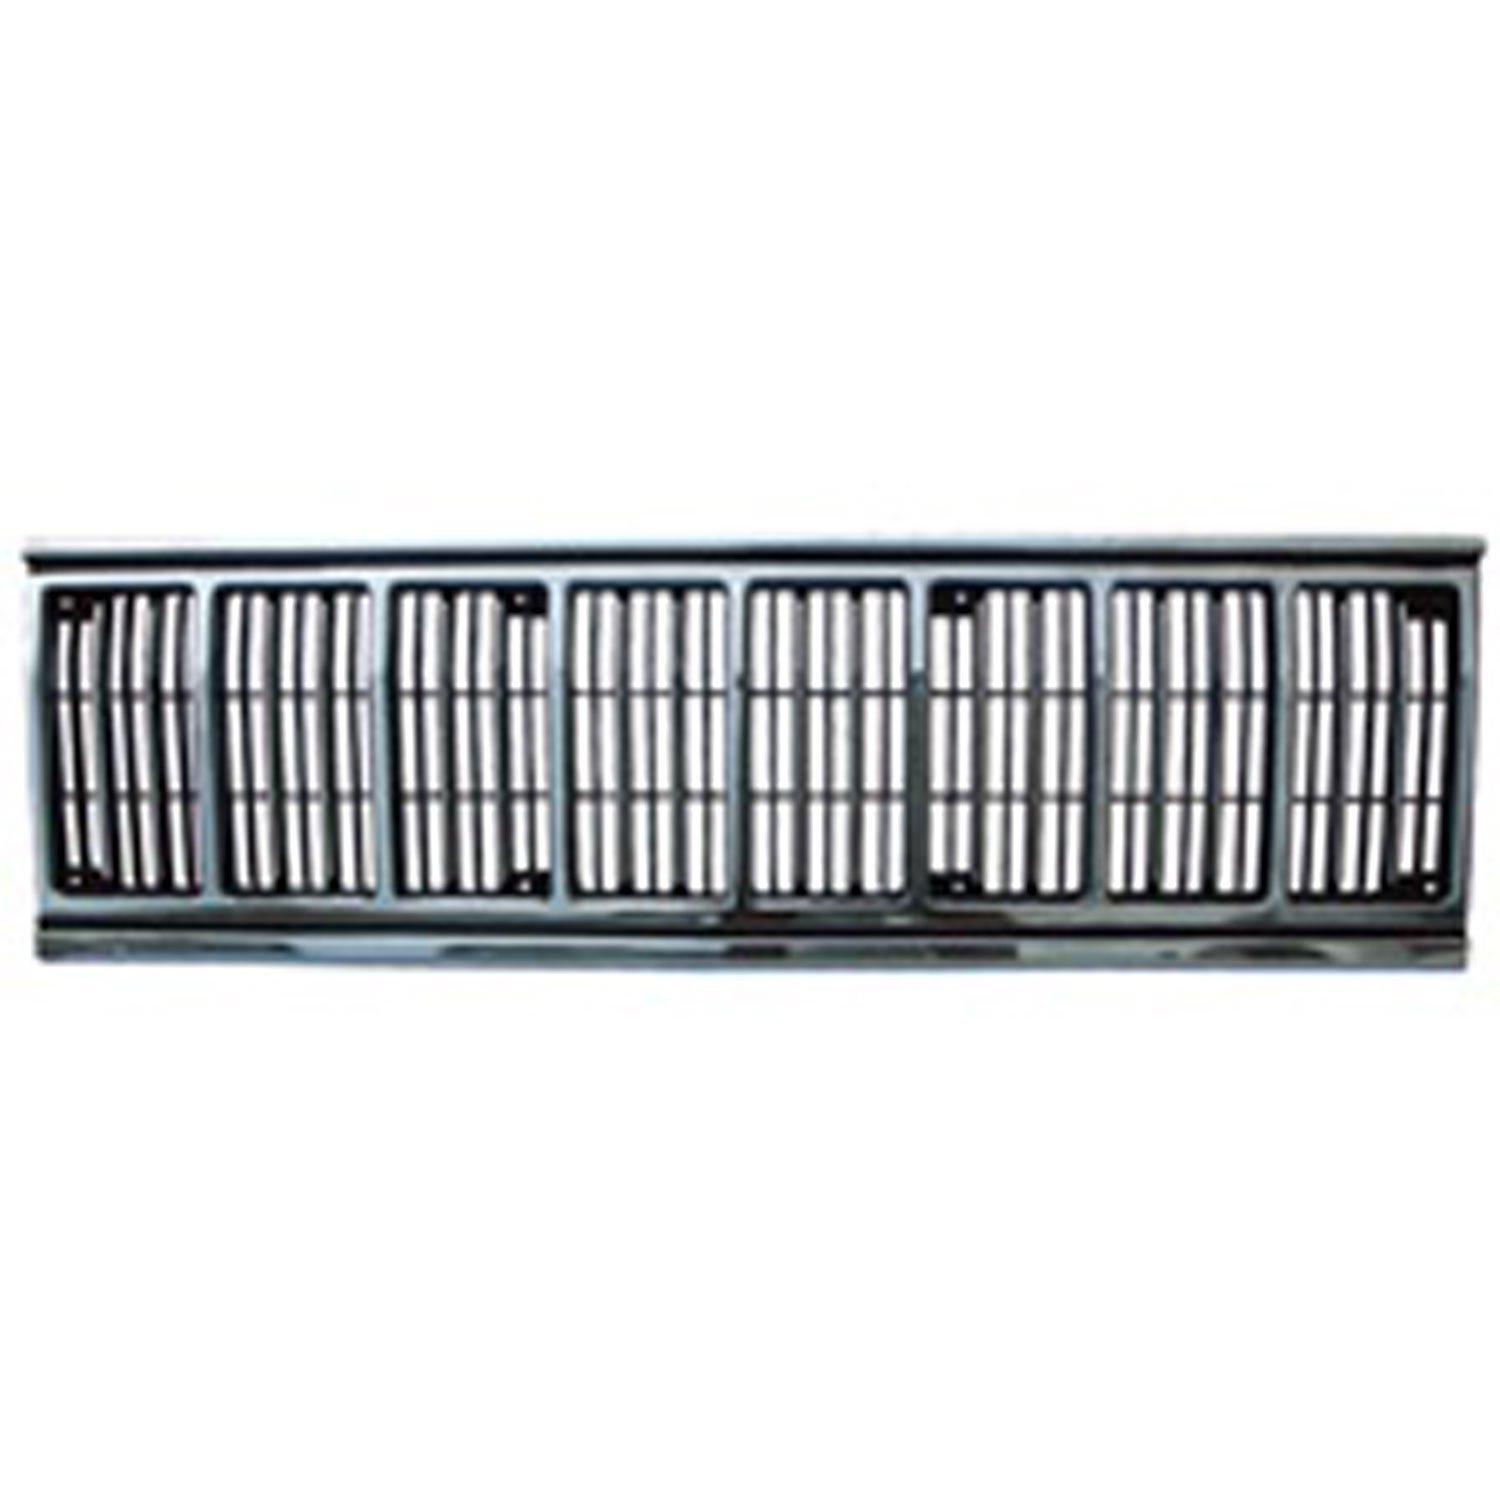 This black and chrome grille insert from Omix-ADA fits 91-96 Jeep Cherokee XJ.